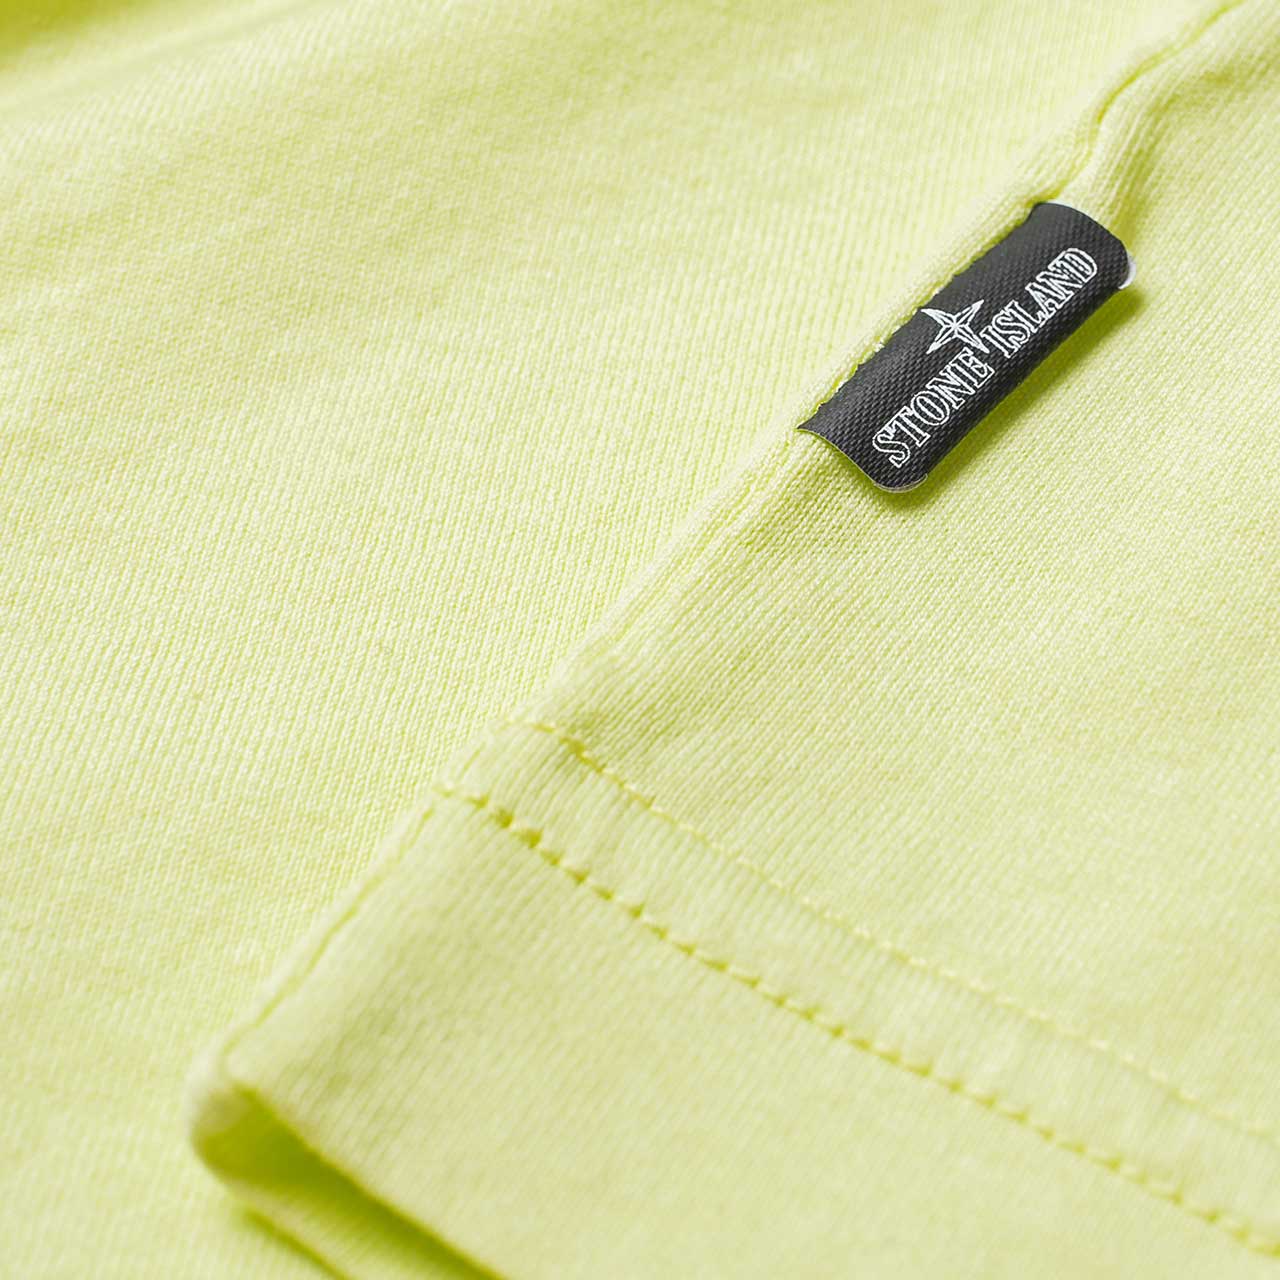 stone island shadow project t-shirt (yellow) - 701920510.v0051 - a.plus - Image - 8